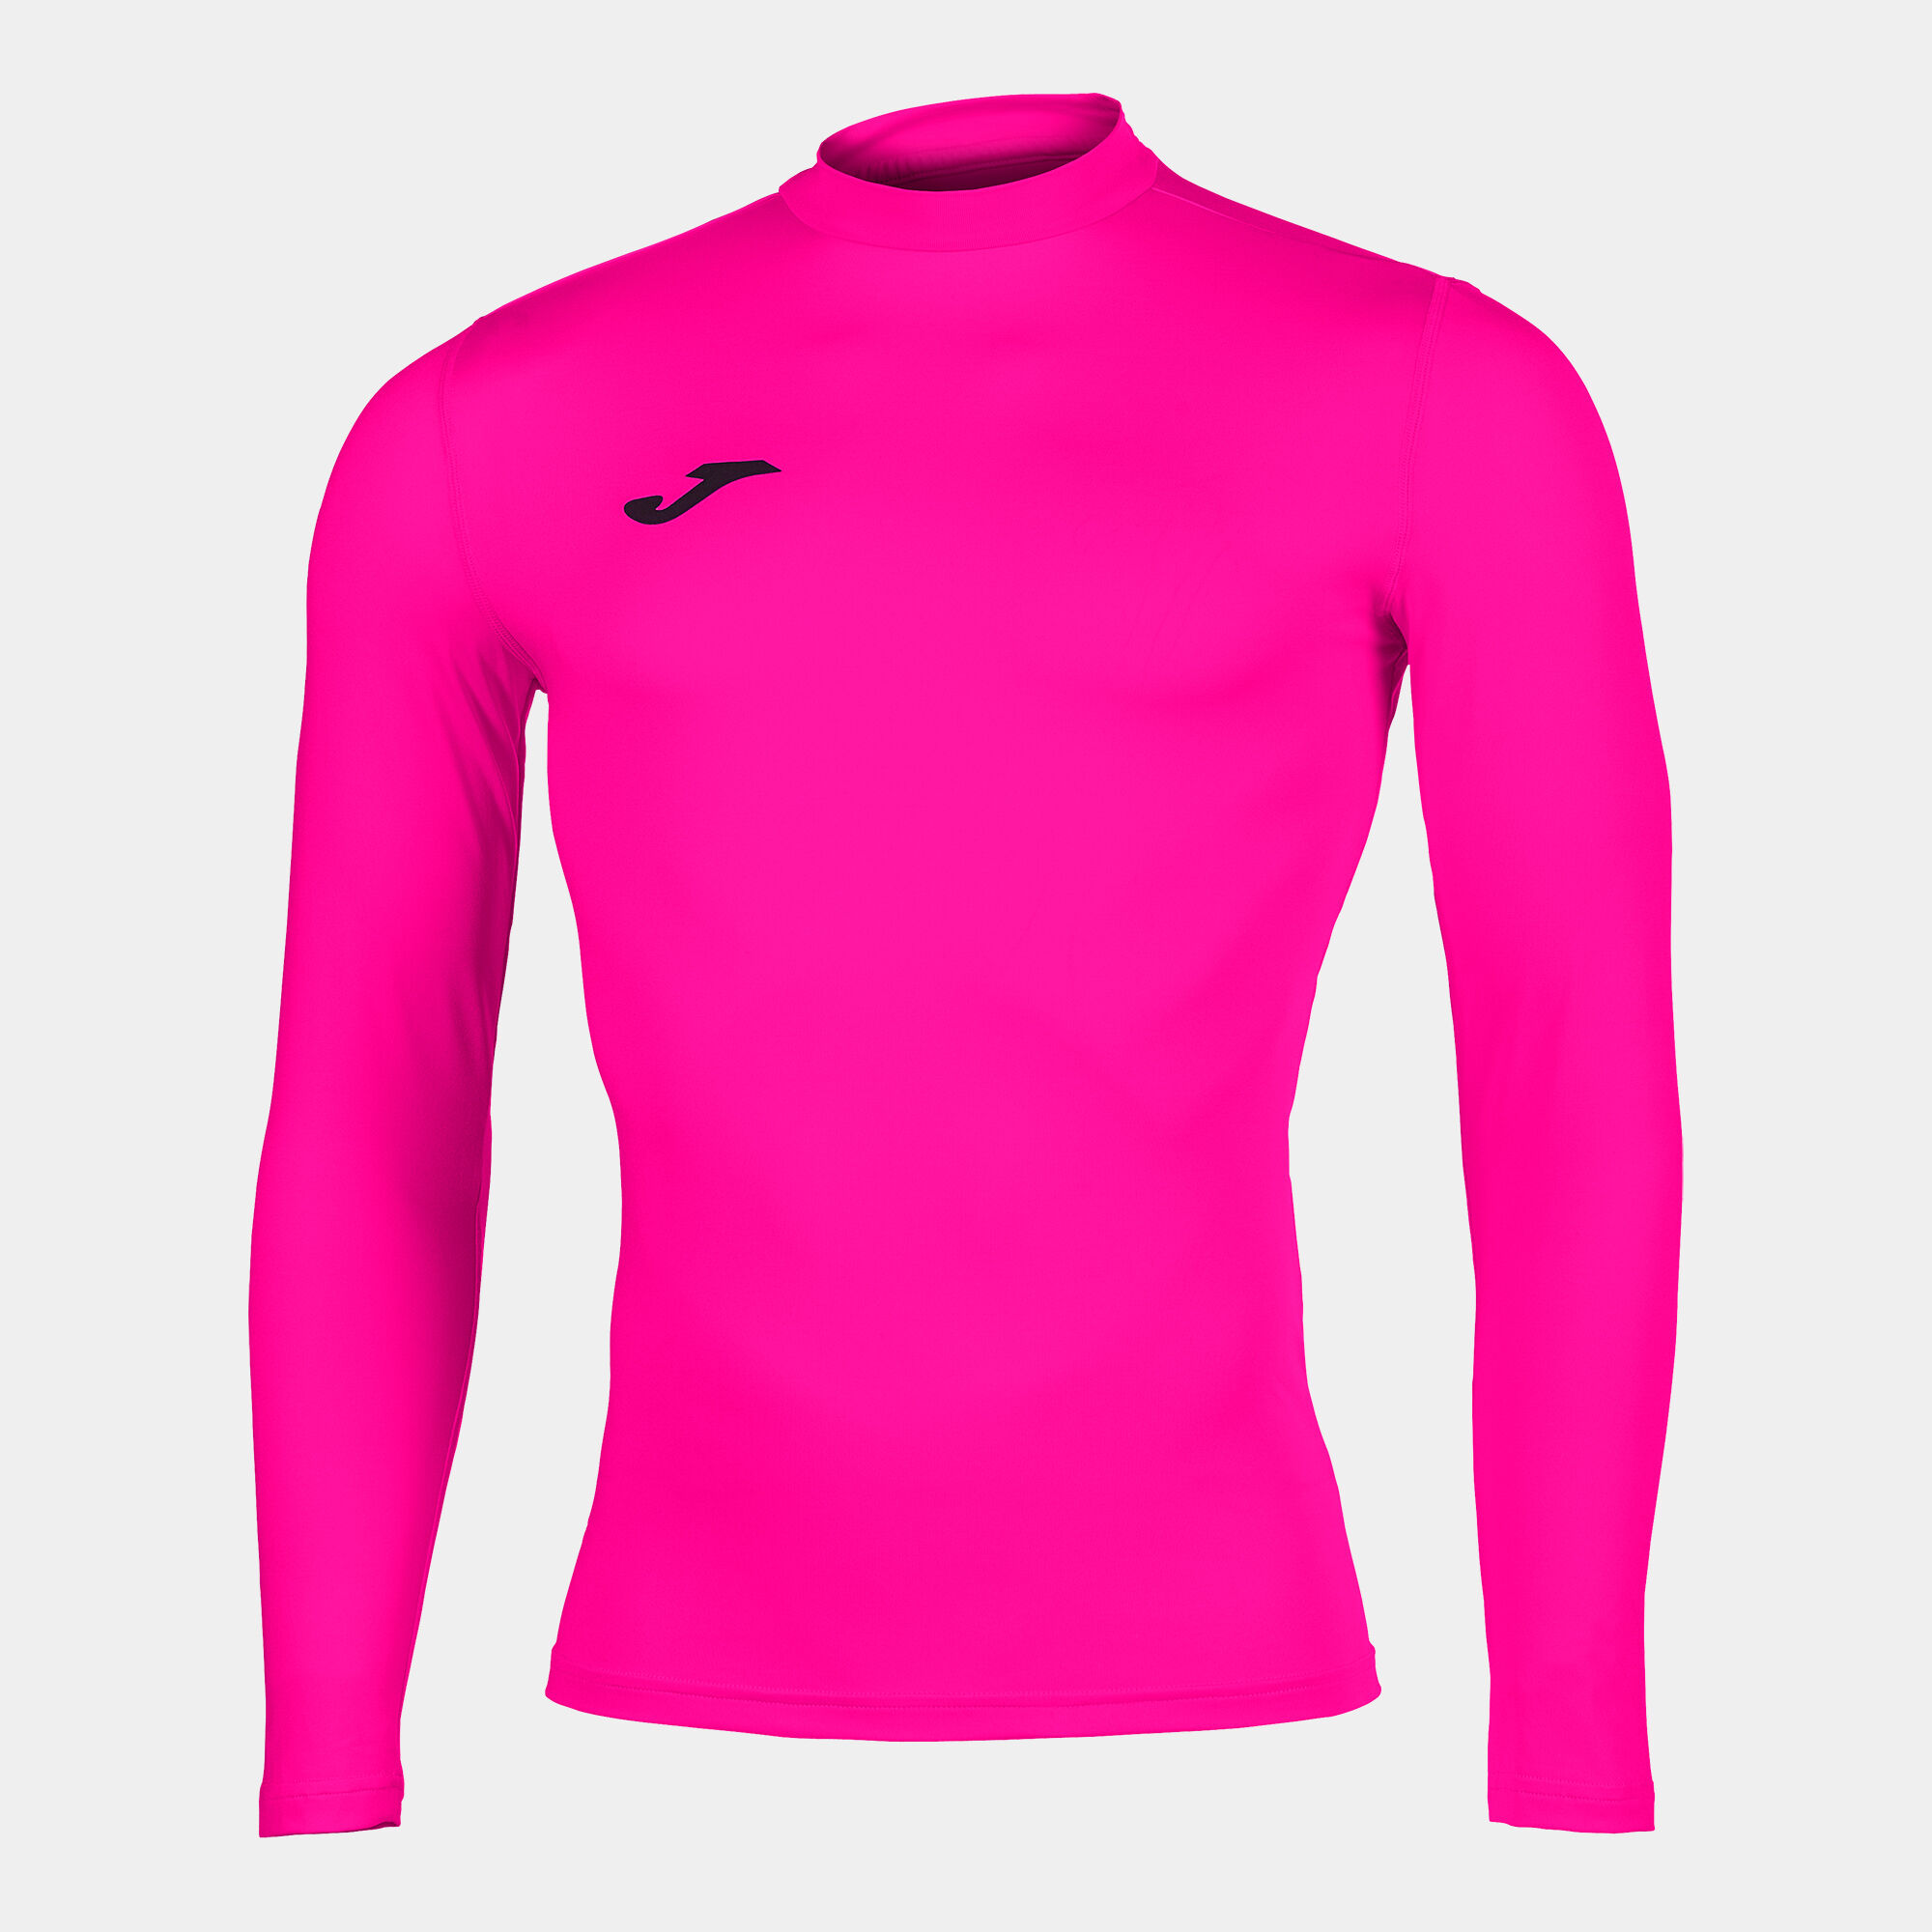 MAILLOT MANCHES LONGUES UNISEXE BRAMA ACADEMY ROSE FLUO